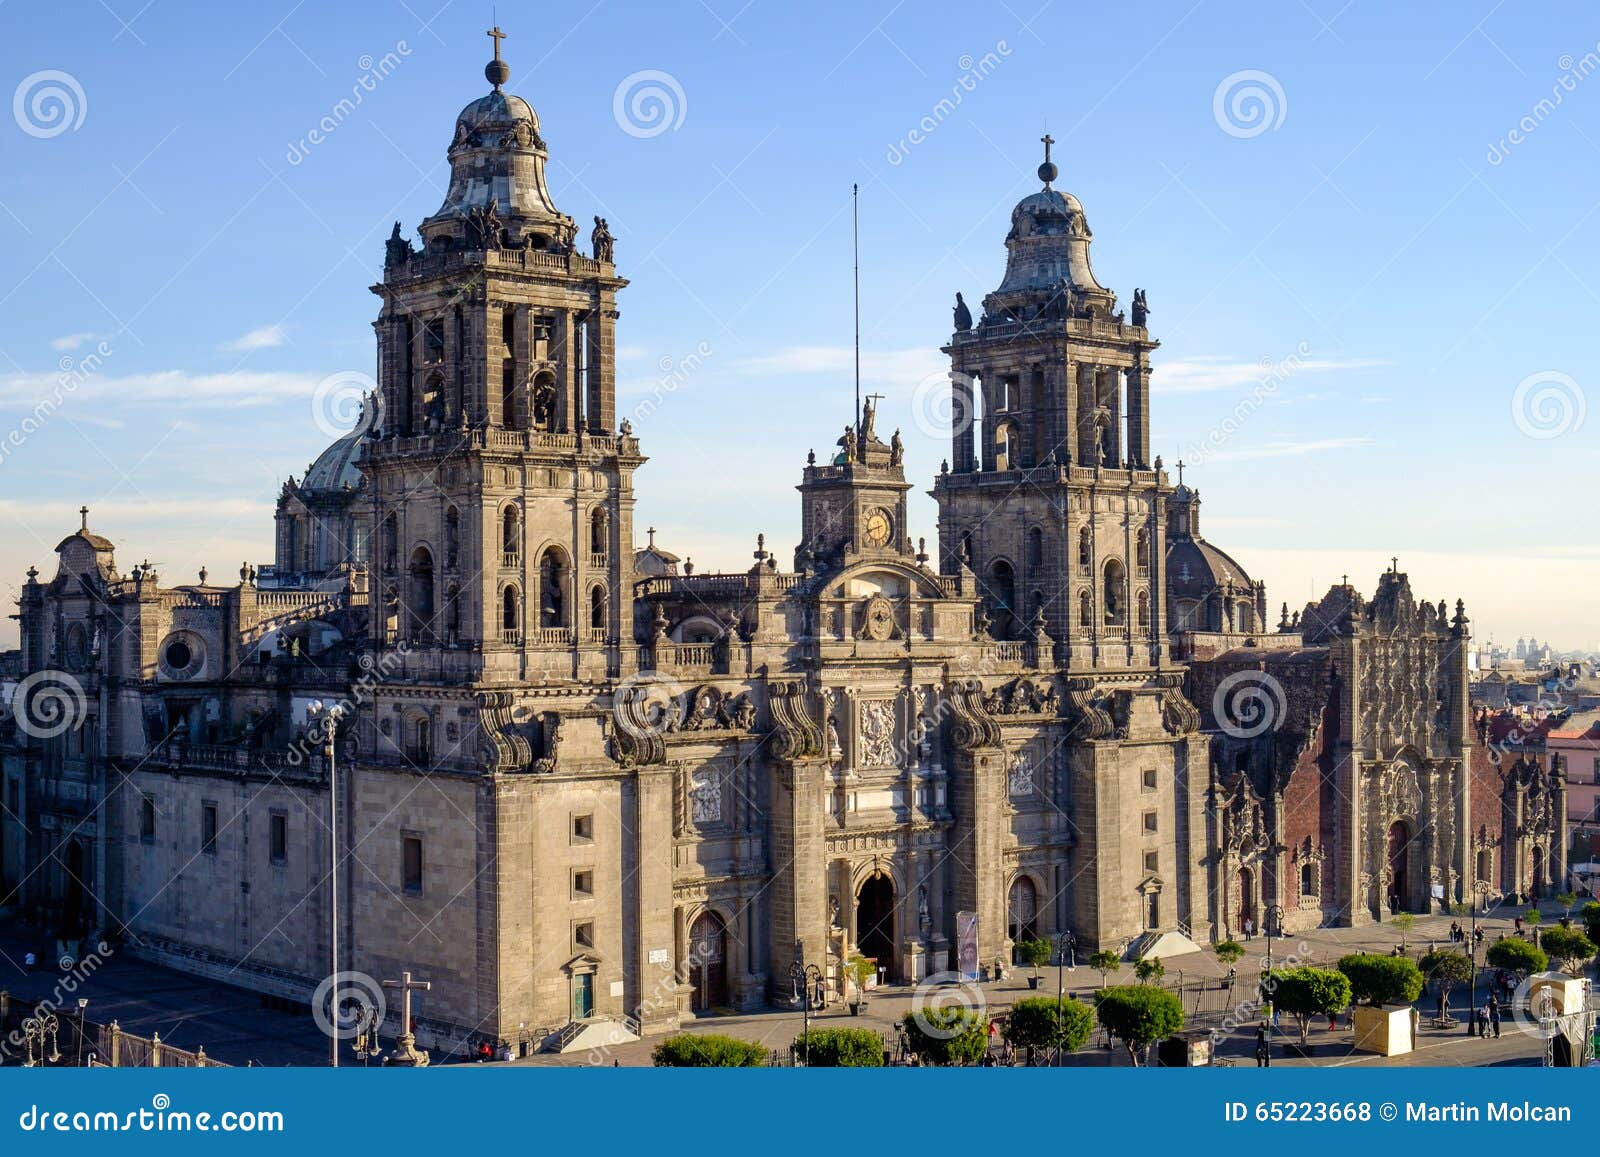 view of zocalo square and cathedral in mexico city